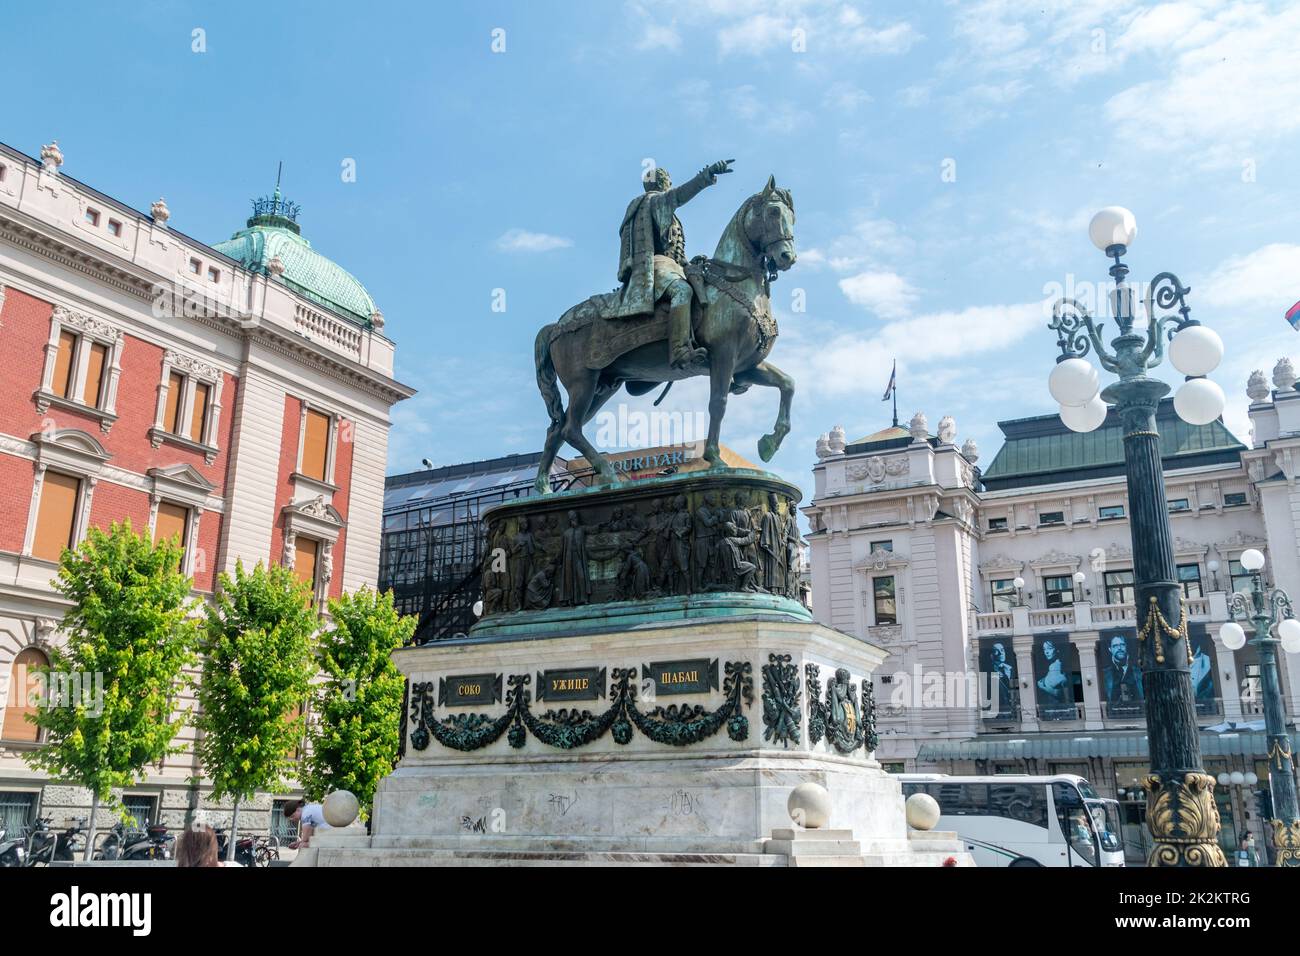 Belgrade, Serbia - June 7, 2022: The statue of Prince Mihailo, pointing towards Old Serbia. Stock Photo